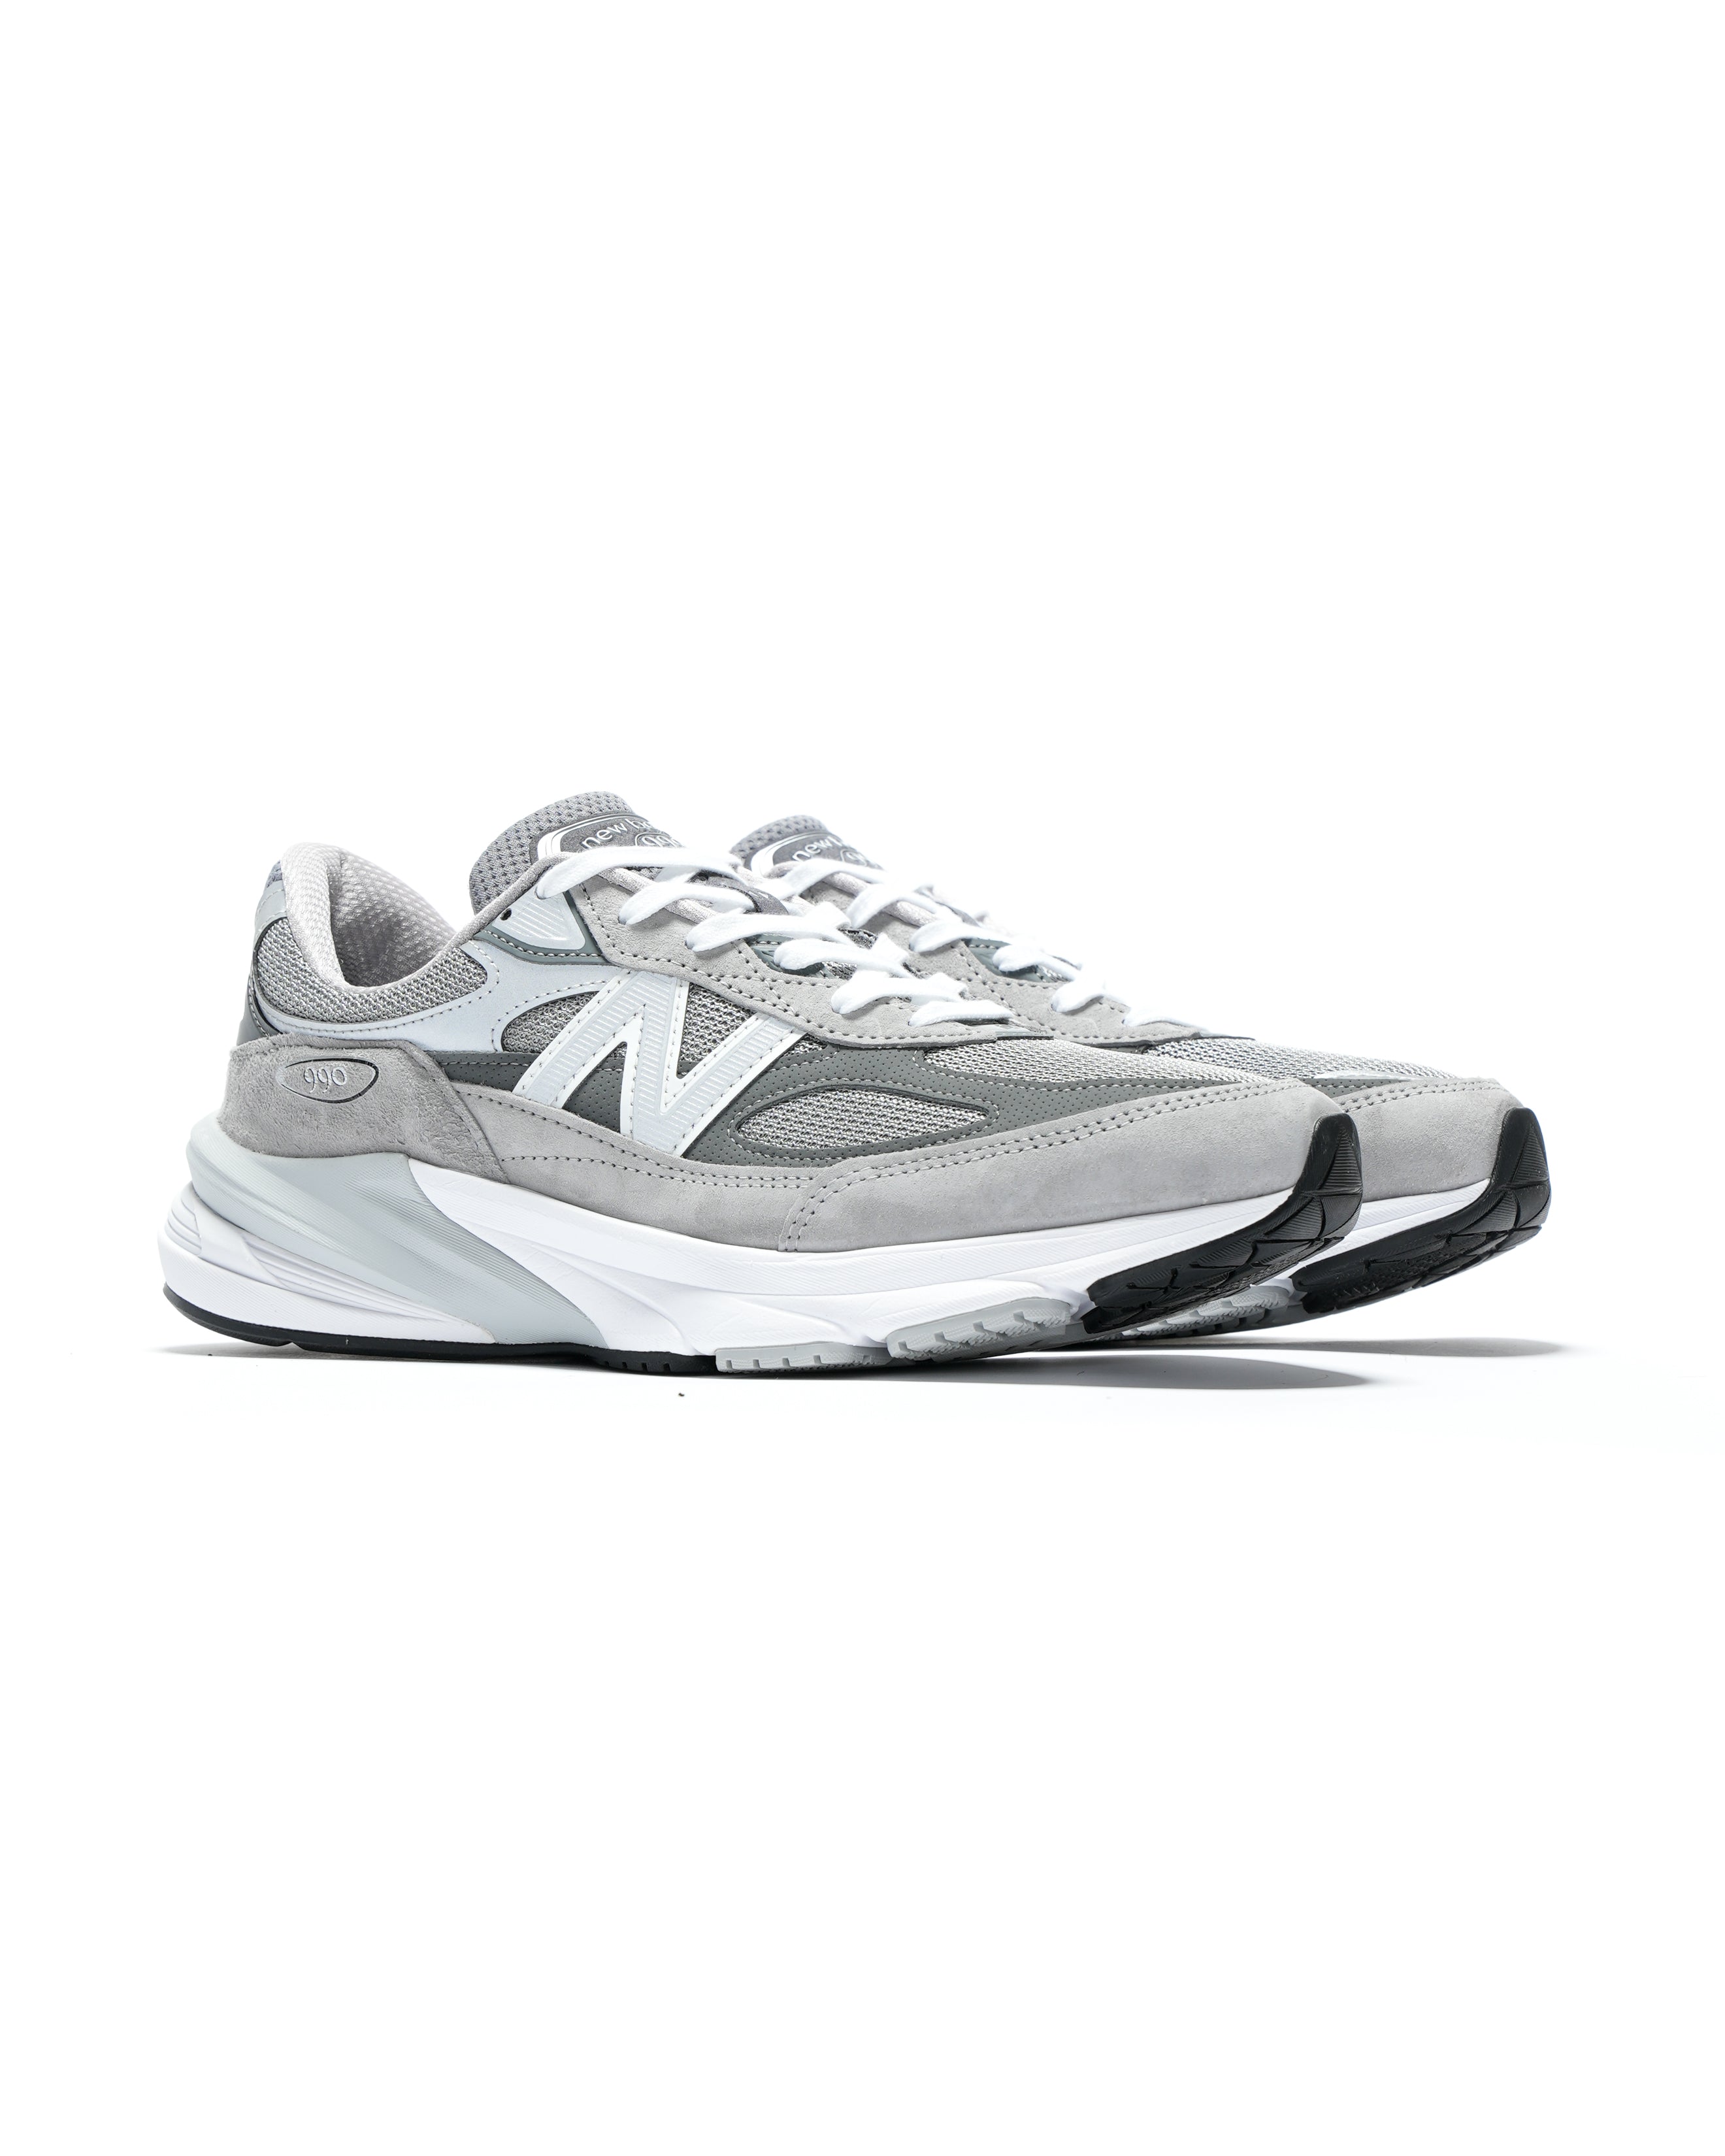 M990v6 - Grey Core | Nepenthes New York